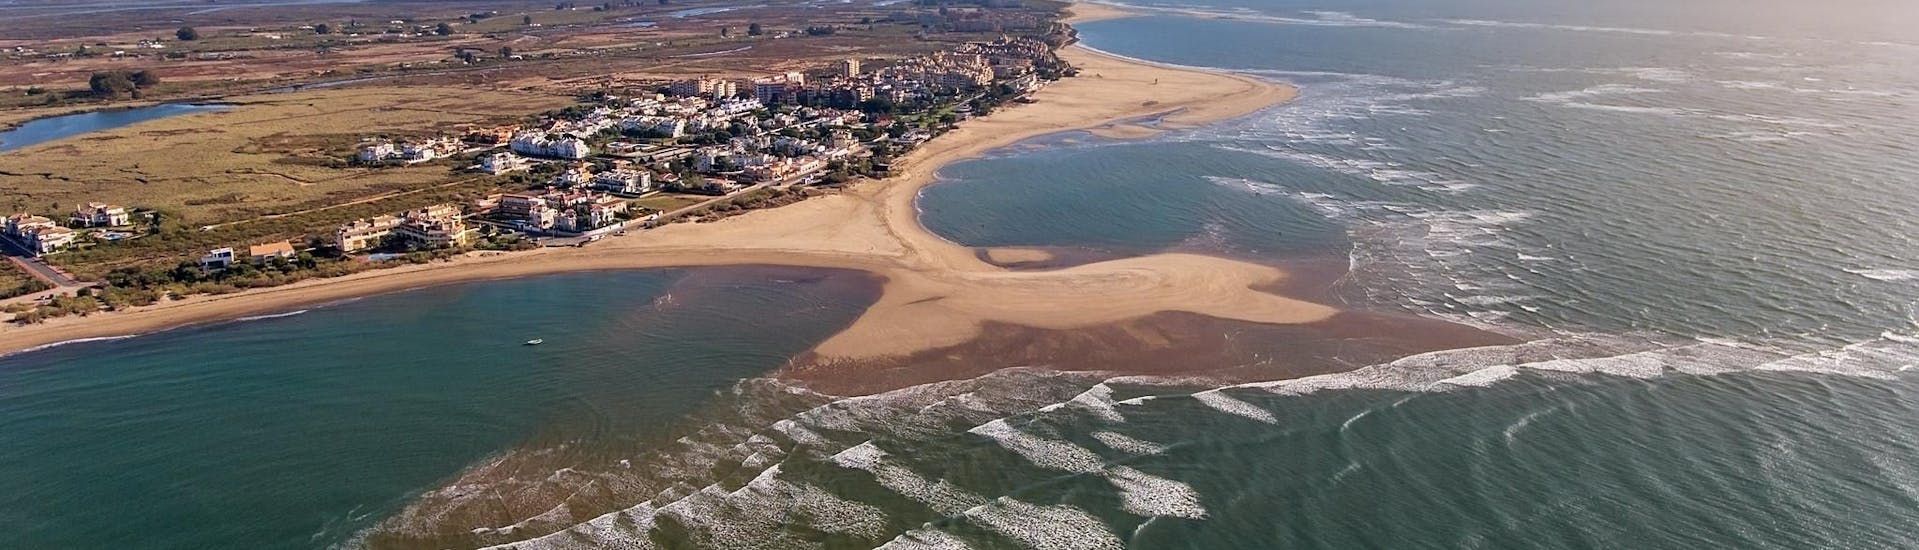 Aerial view of Isla Canela, a wonderful location in Huelva that you can discover with a jet ski.